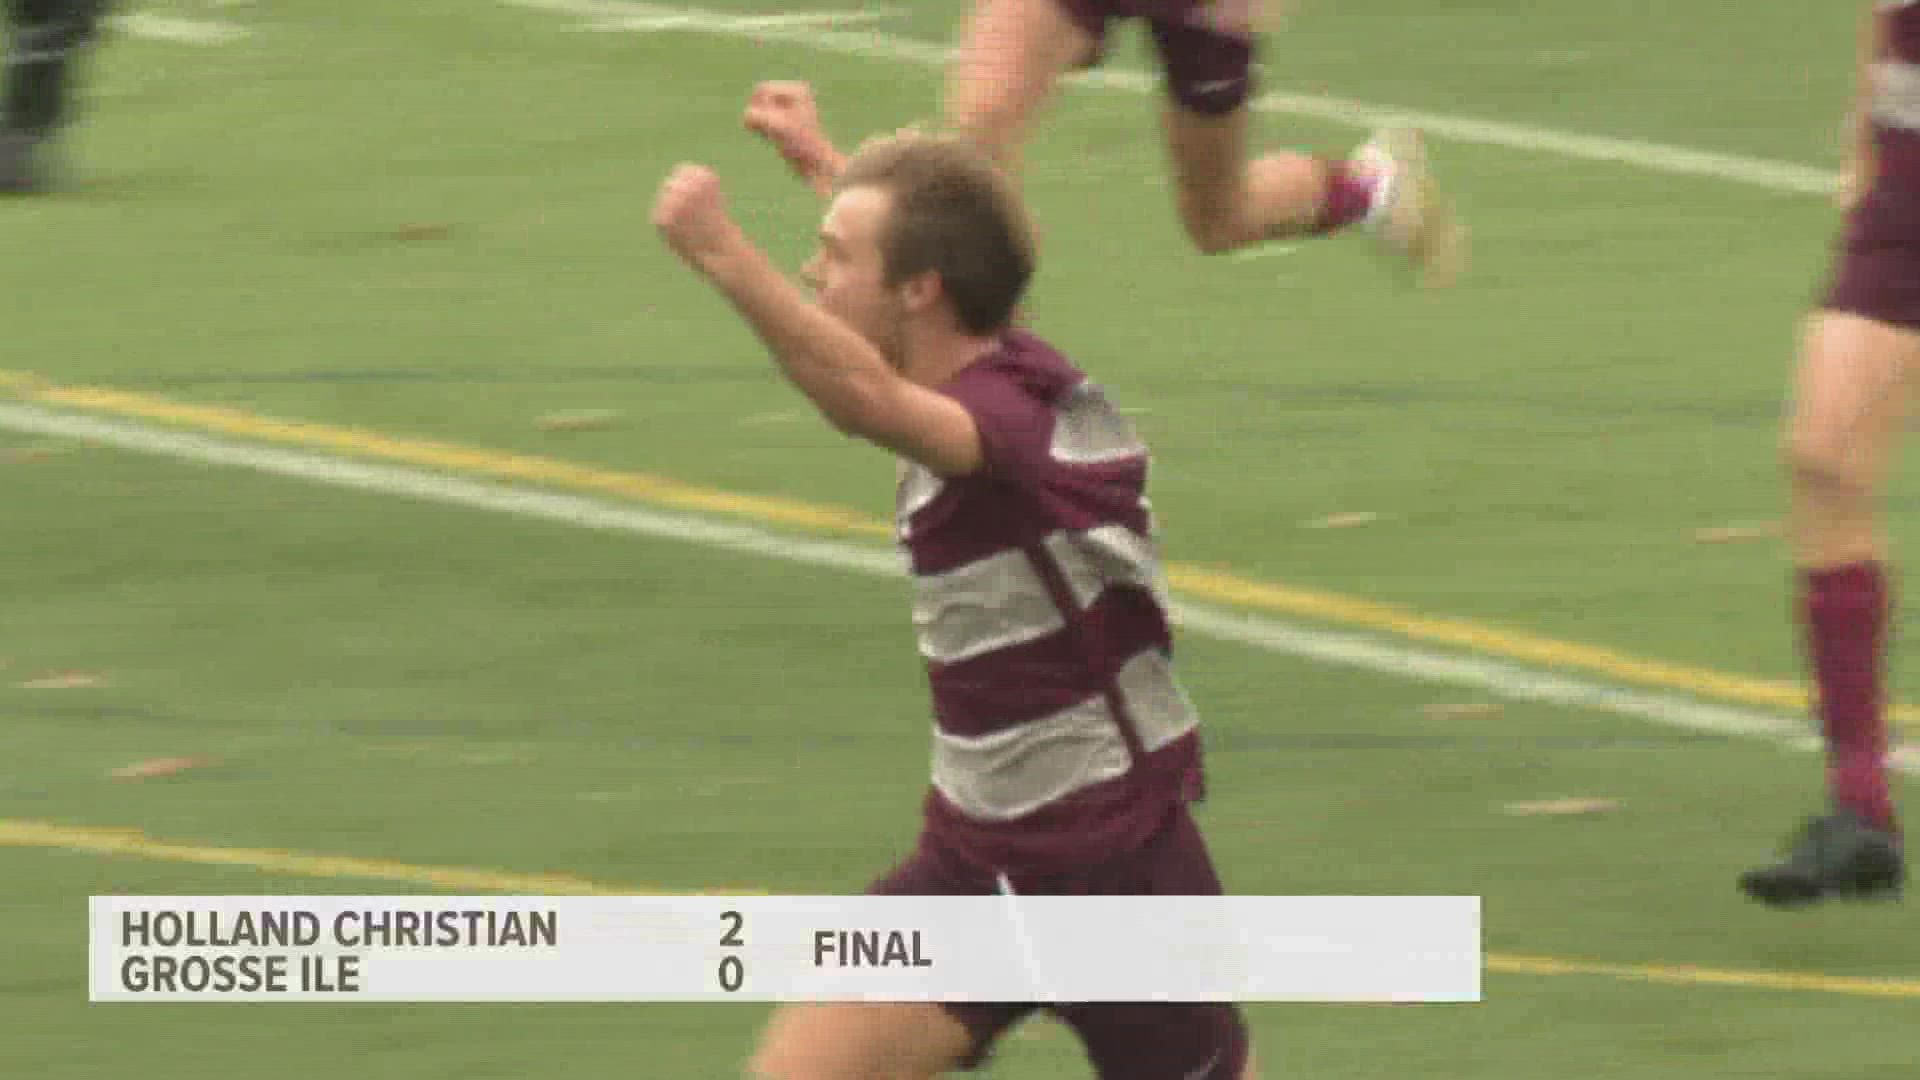 Holland Christian wins 2-0, it's their first boys soccer state title since 2003.